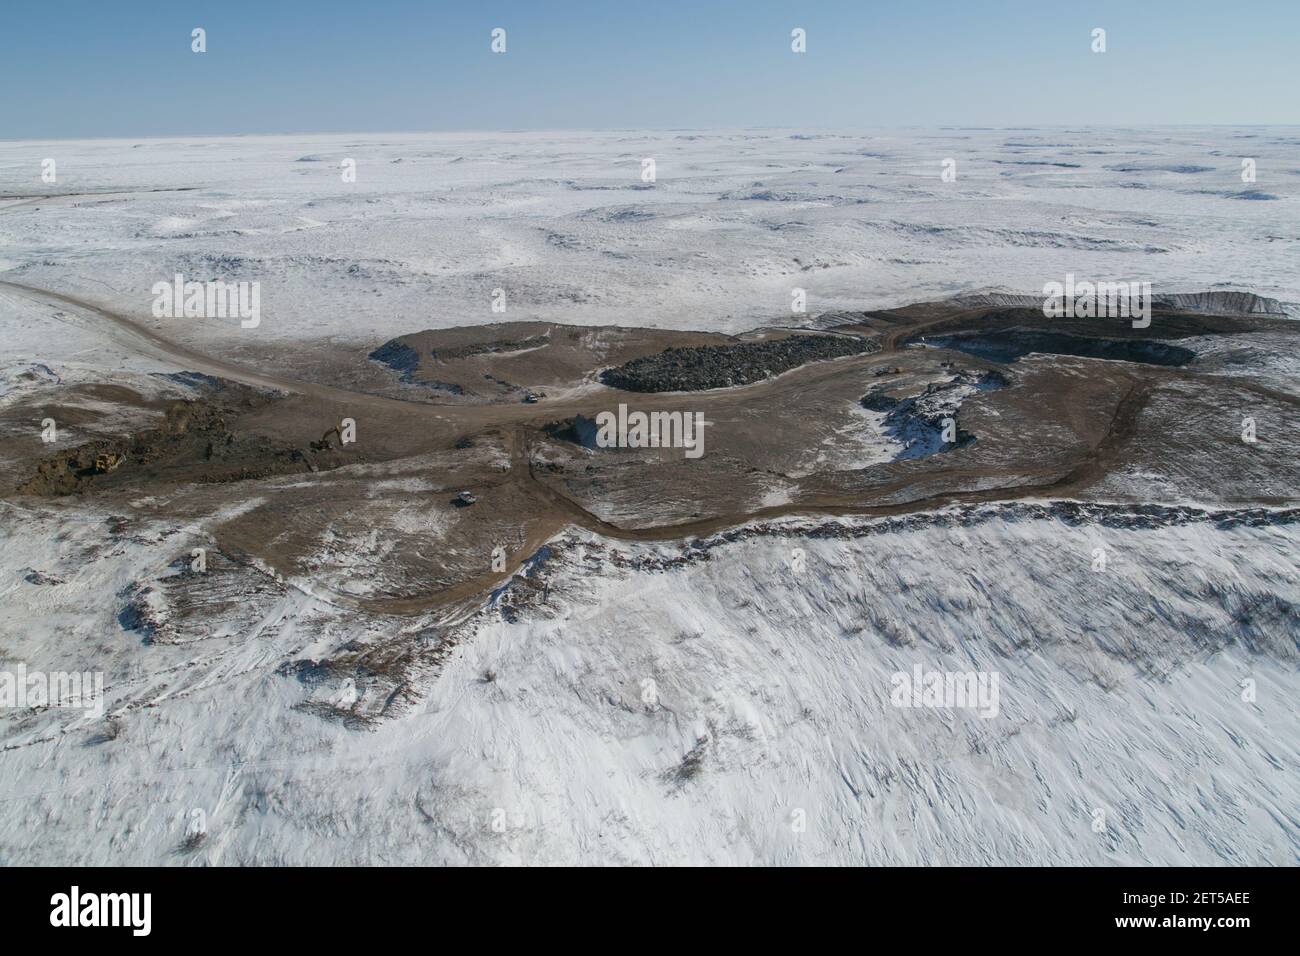 Aerial view of one of the gravel pits used to build the Inuvik-Tuktoyaktuk Highway, Northwest Territories, Canada's Arctic. Stock Photo